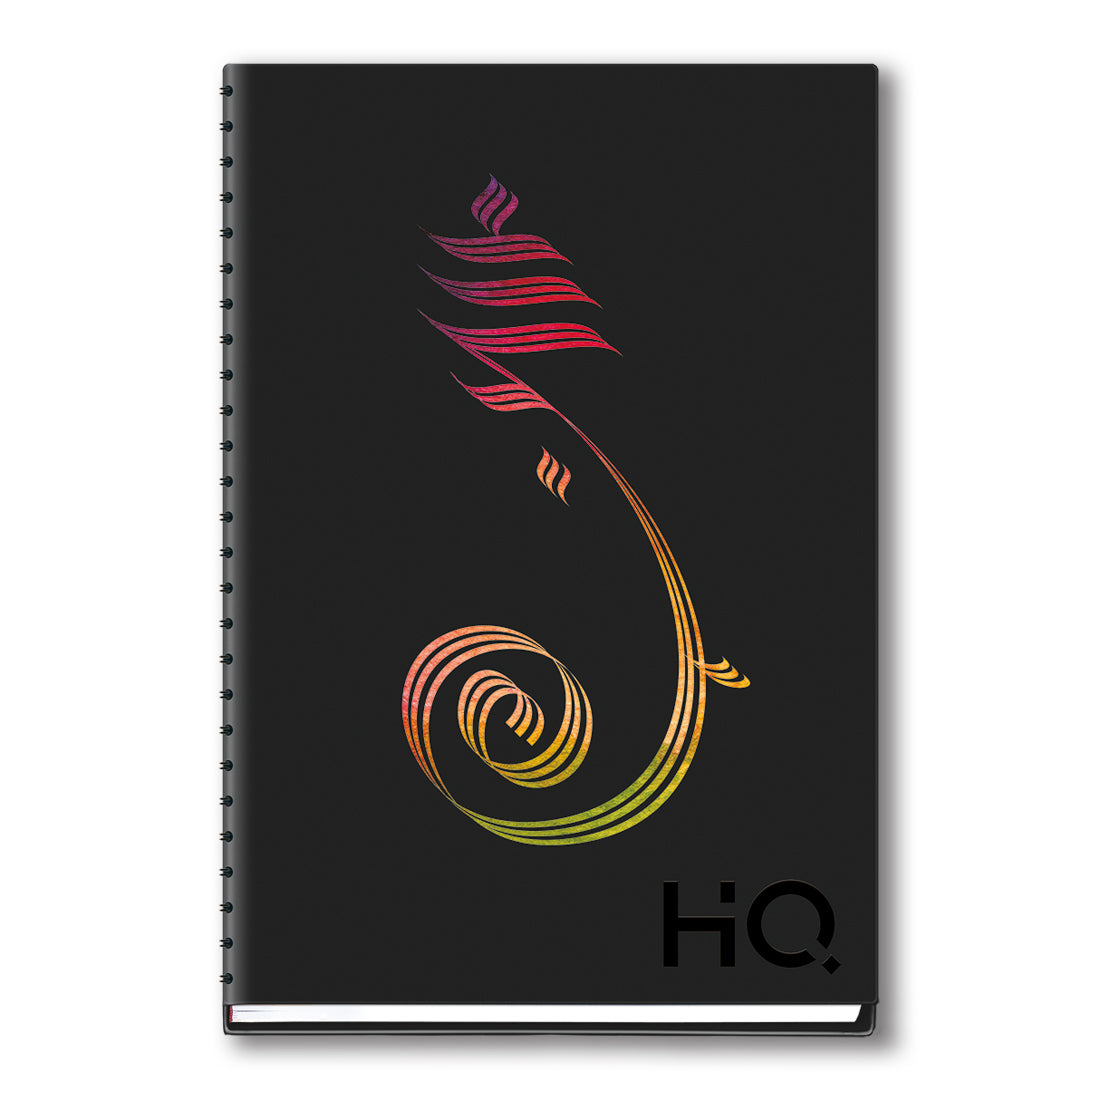 Navneet HQ | Hard Cover Ganesha Notebook for Office and Personal Use | Design 4 | Wiro / Spiral Bound | Single Line | A5 Size - 21 cm x 14.8 cm | 192 Pages